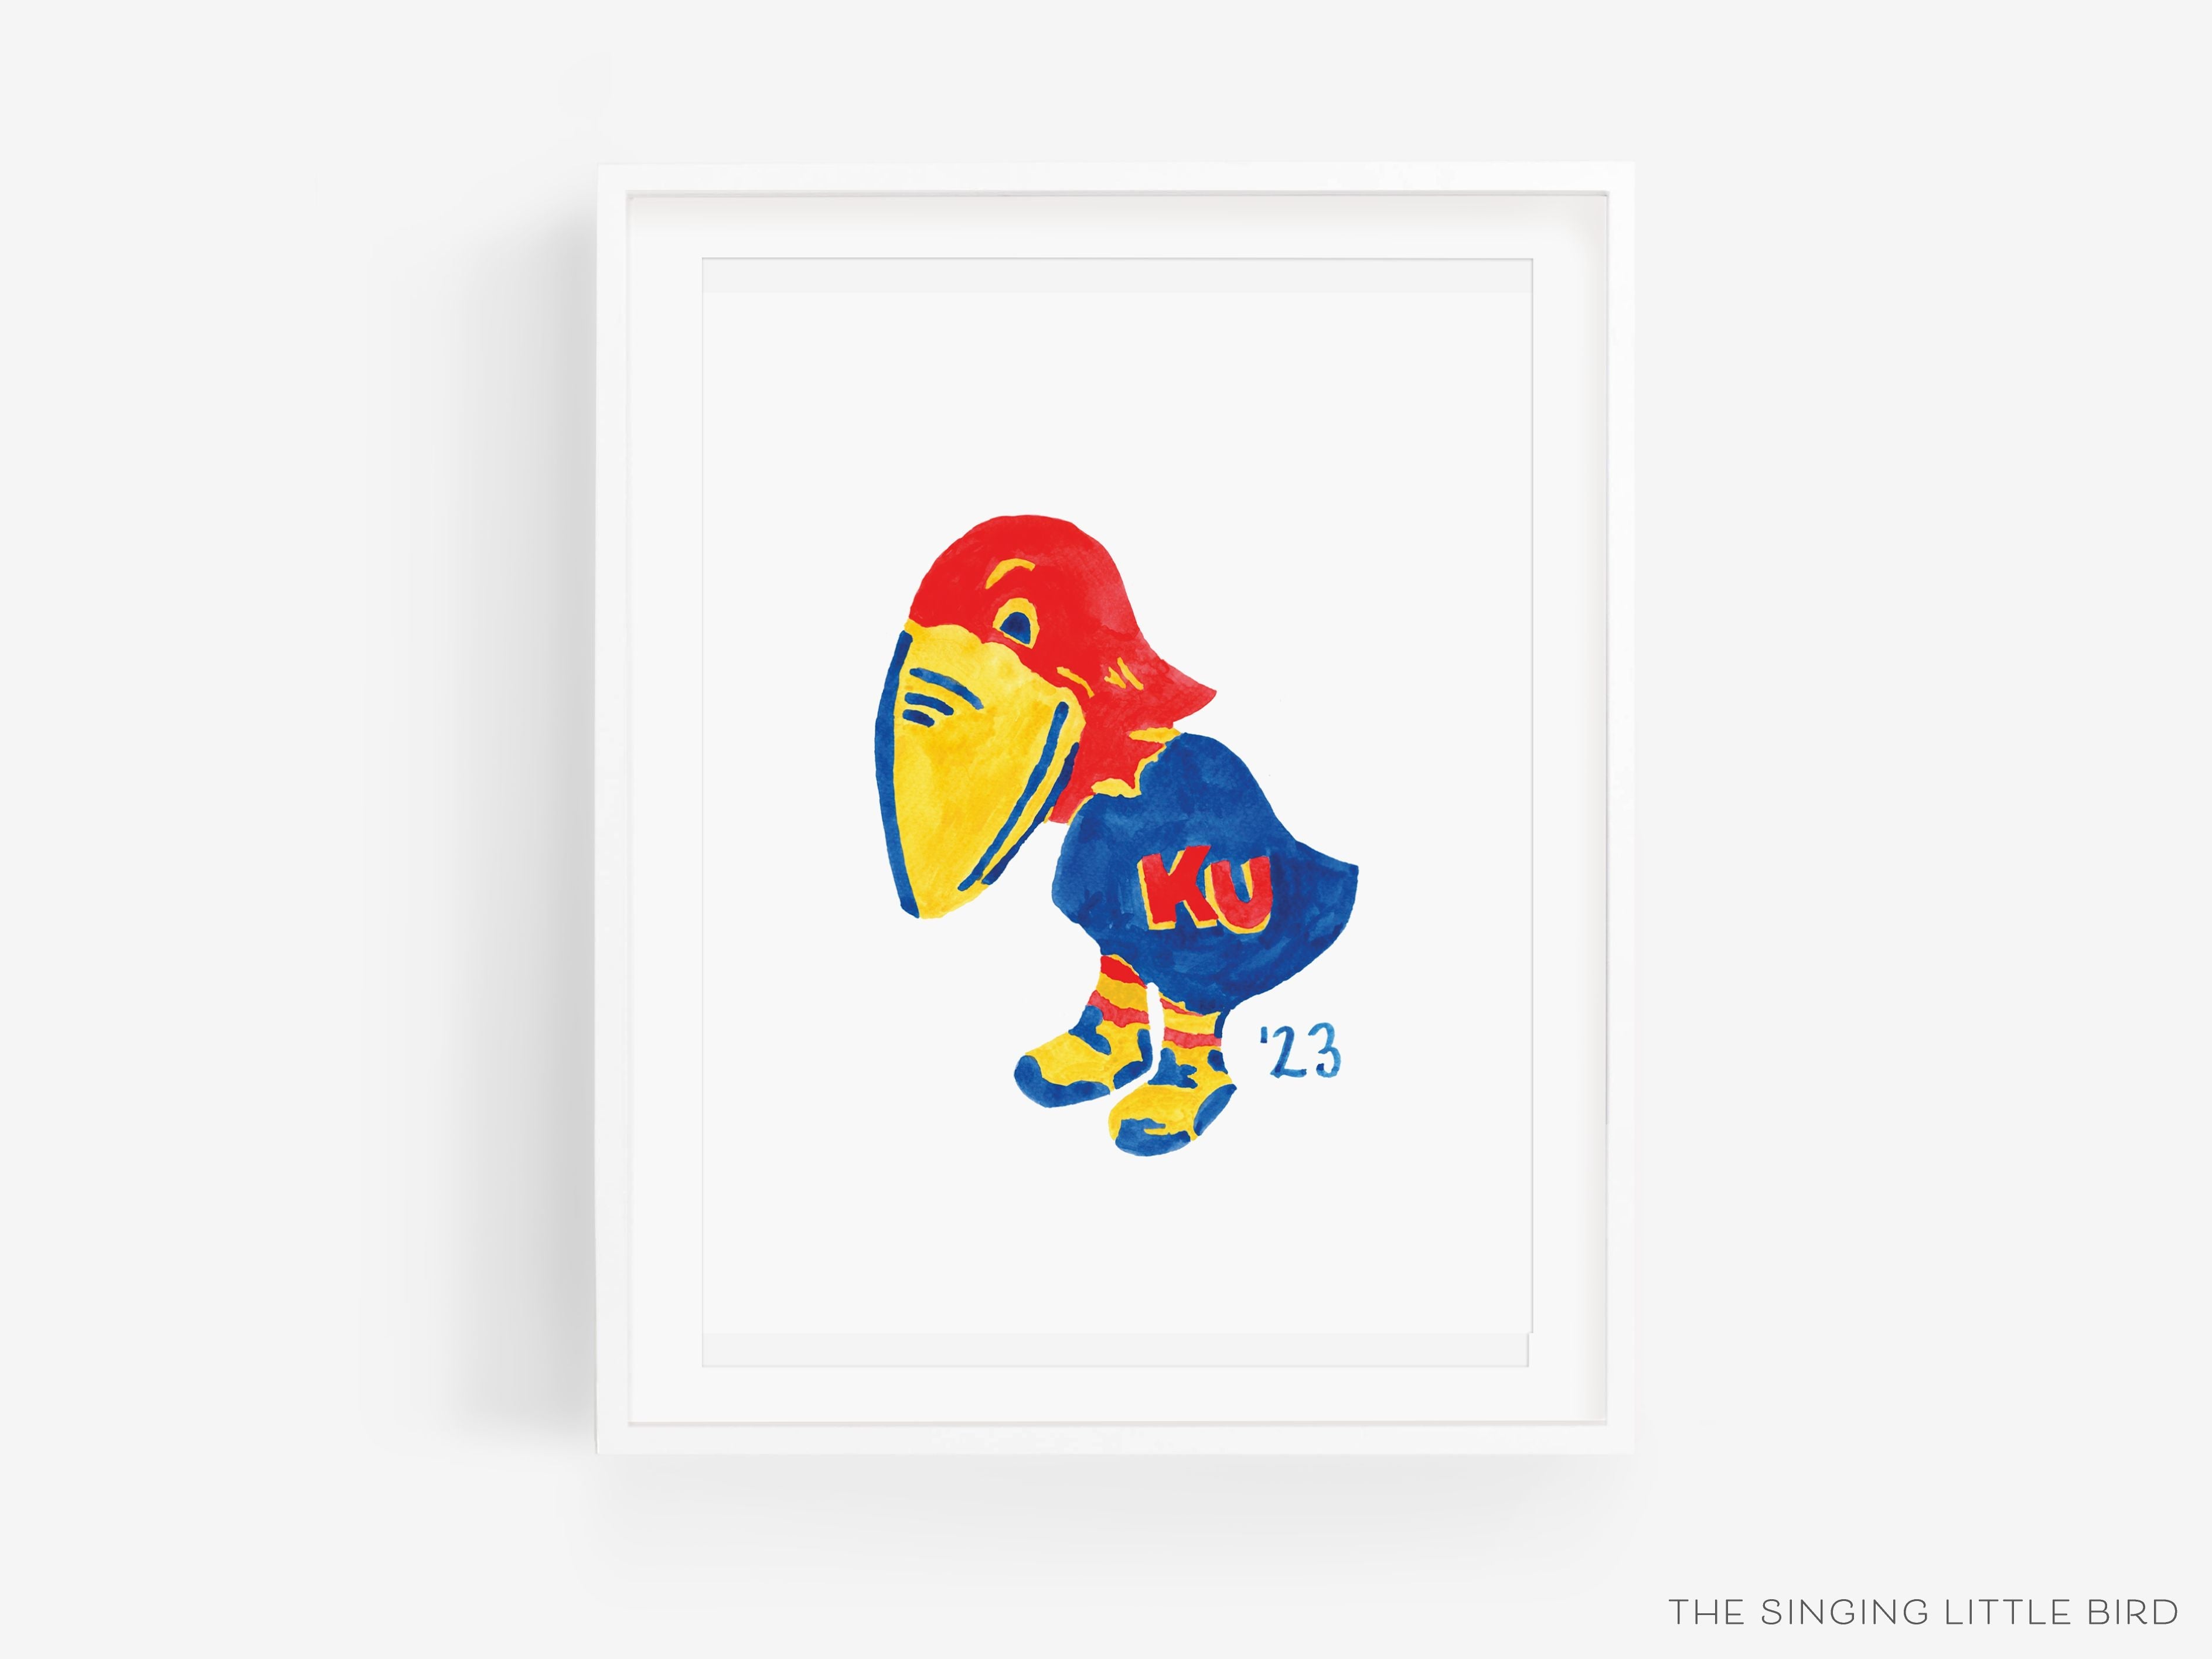 1923 Kansas Jayhawk Art Print [Officially Licensed Product]-This watercolor art print features our hand-painted 1923 Kansas Jayhawk, printed in the USA on 120lb high quality art paper. This makes a great gift or wall decor for the University of Kansas lover in your life.-The Singing Little Bird